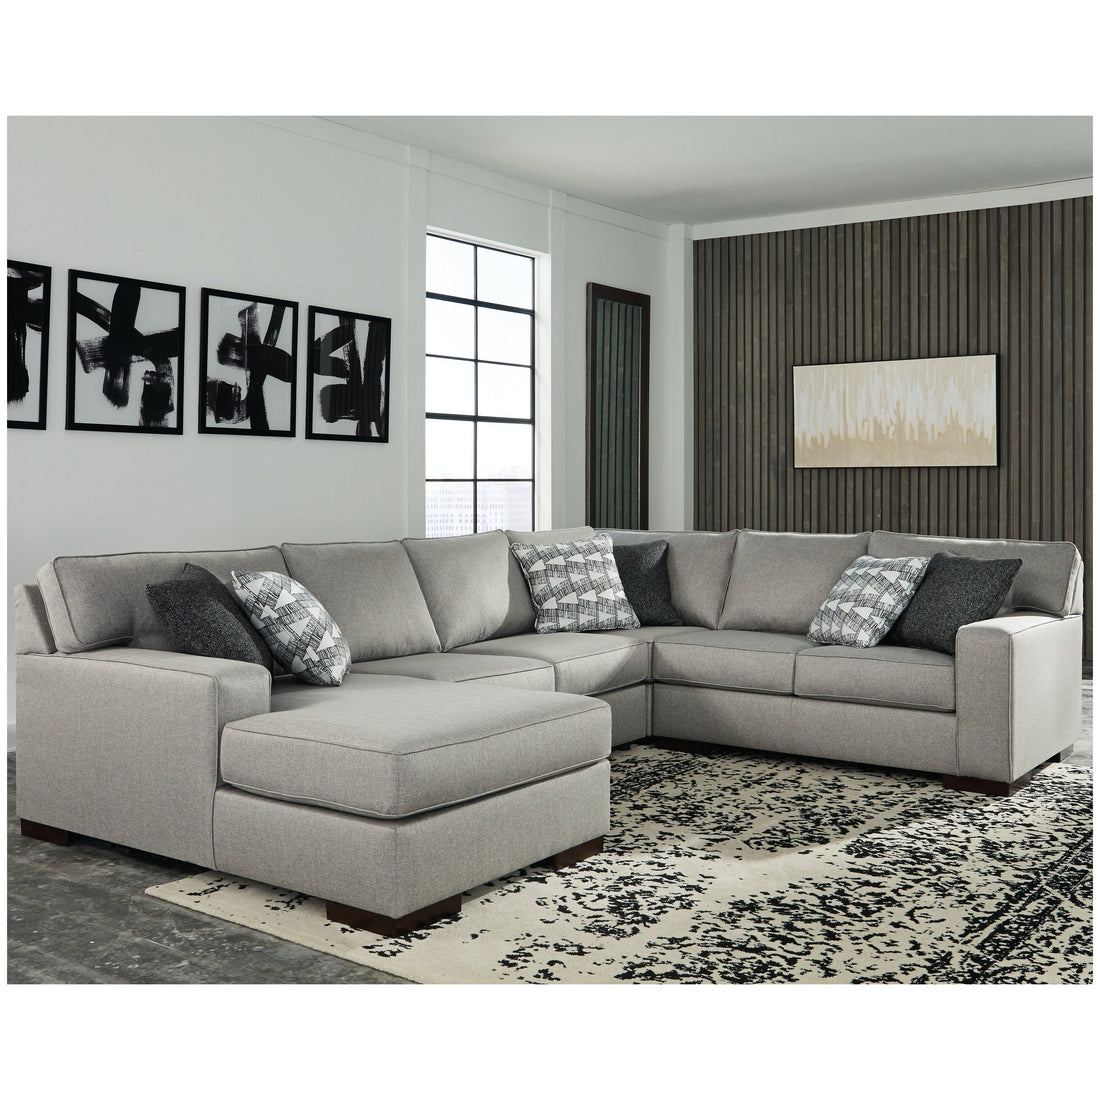 Marsing Nuvella 4-Piece Sectional with Chaise Ash-41902S5